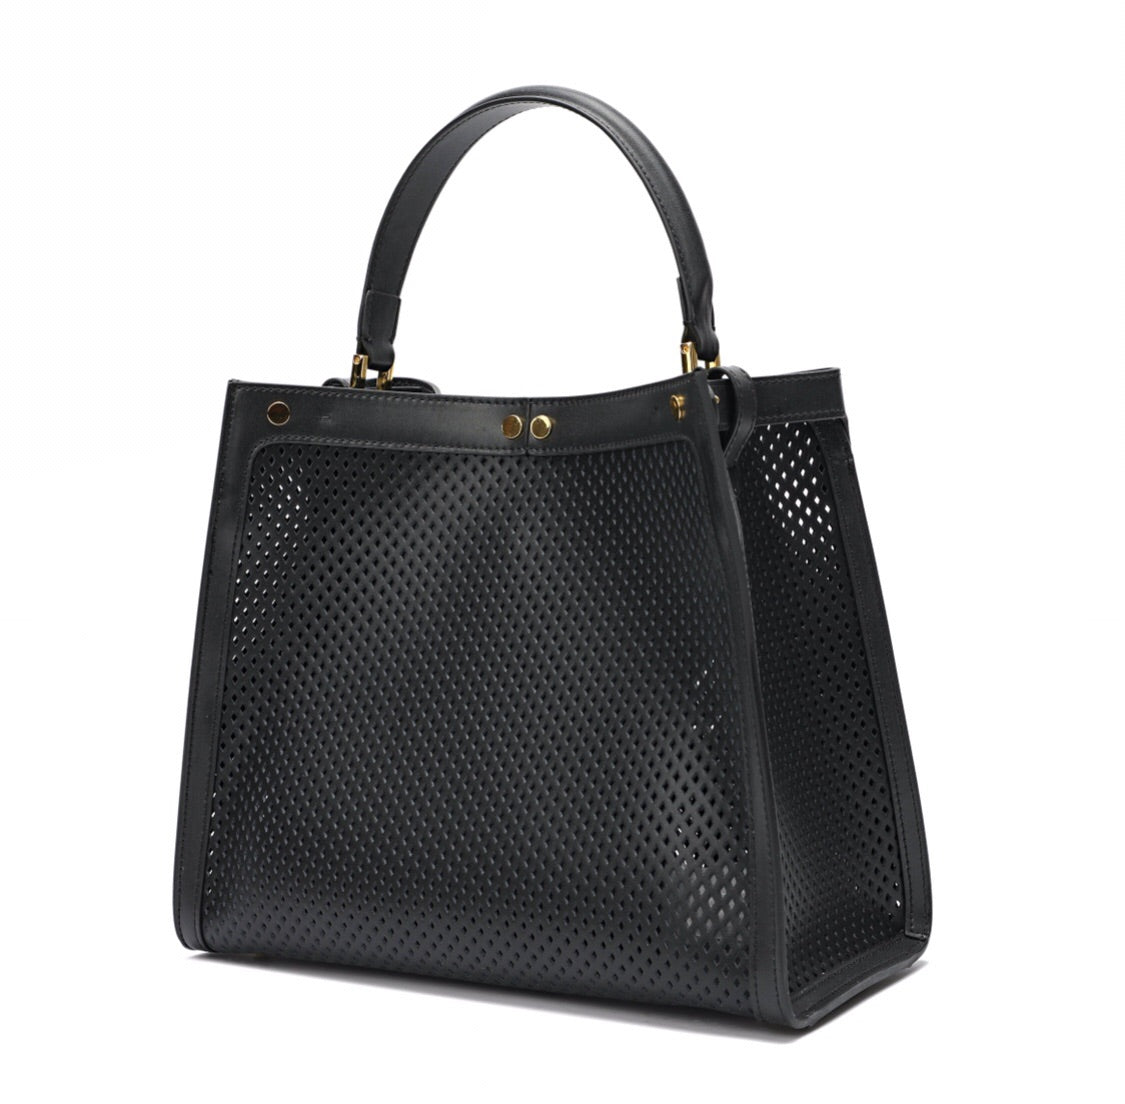 Full-grain Smooth Leather Perforated Tote